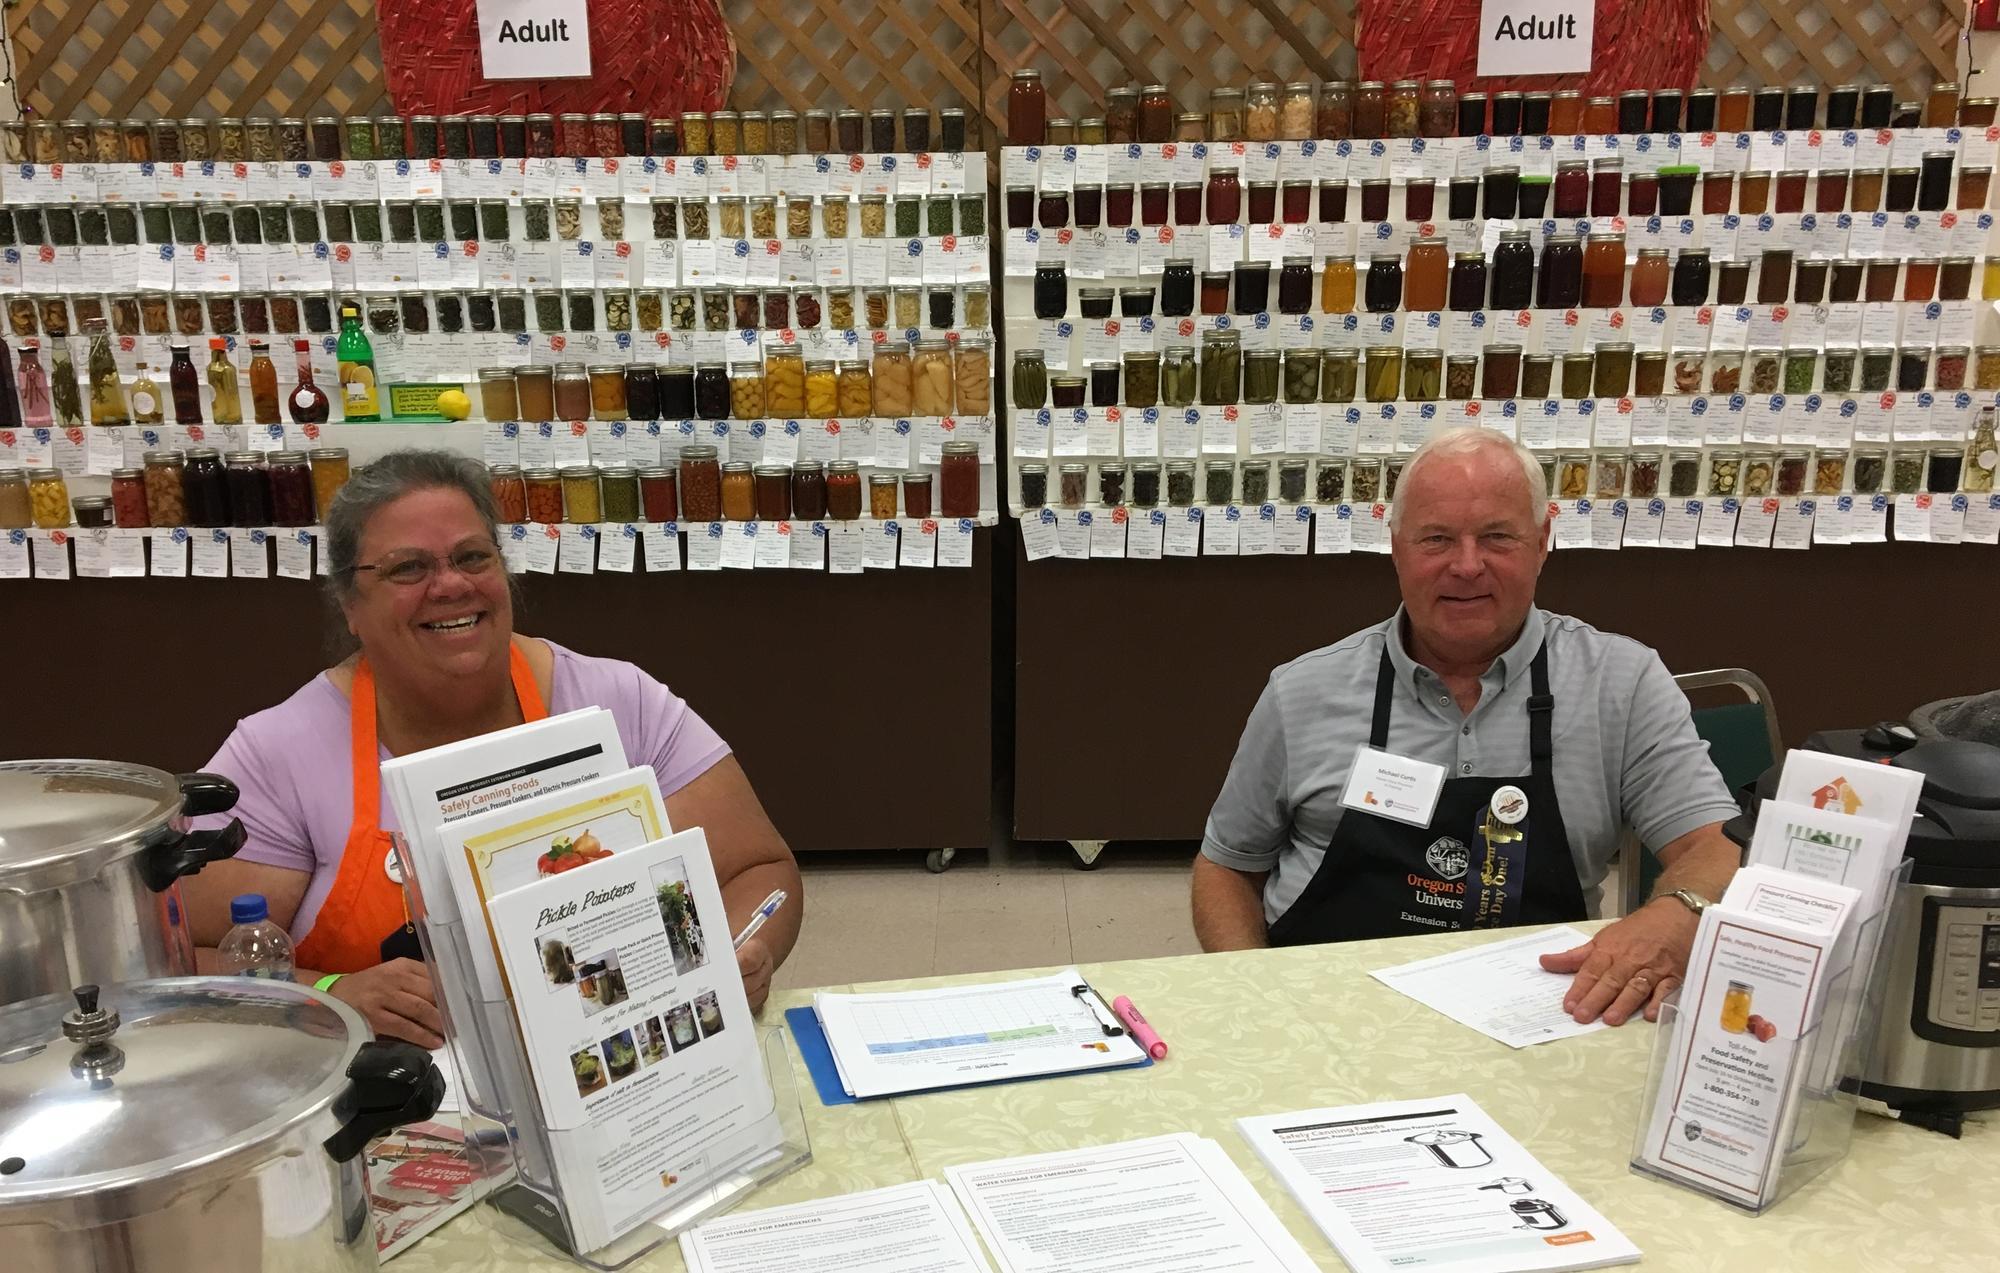 MFP volunteers answering questions at the food preservation display at the Deschutes County Fair